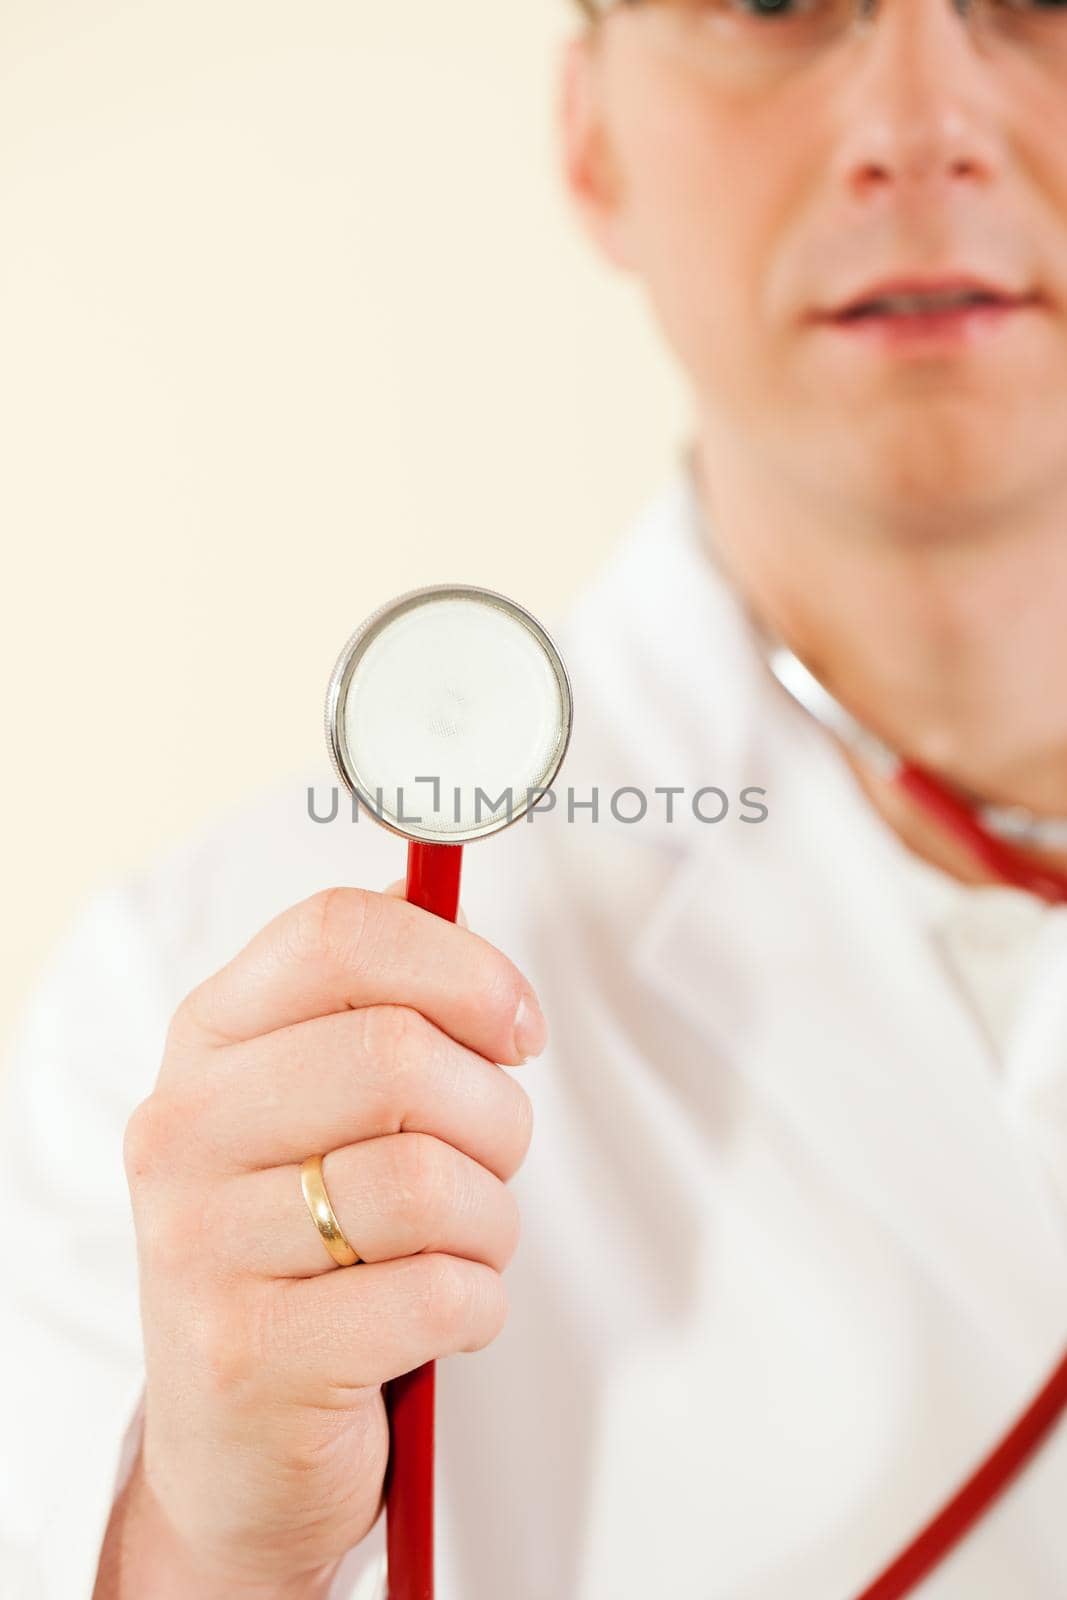 Medical doctor with stethoscope, focus is on the worktool